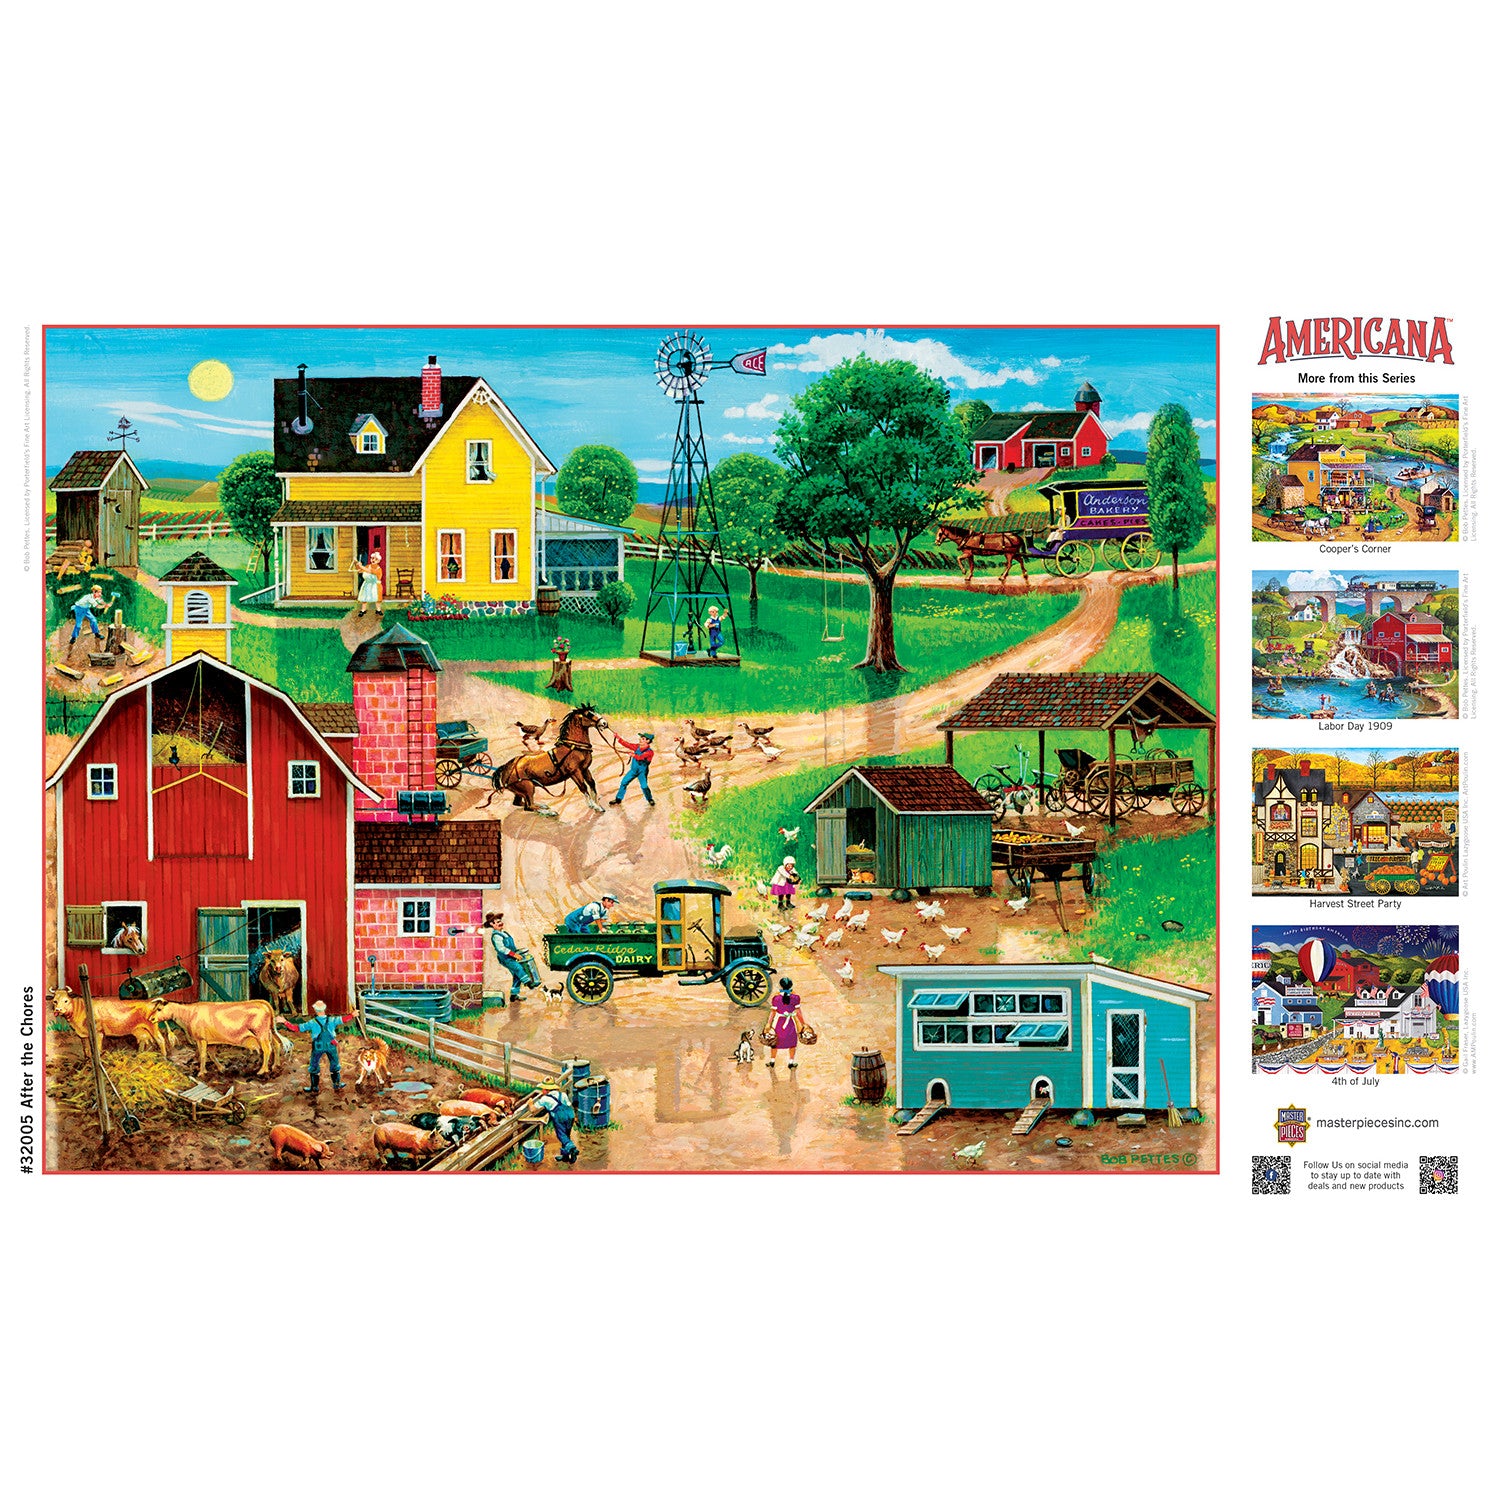 Americana - After the Chores 500 Piece EZ Grip Jigsaw Puzzle